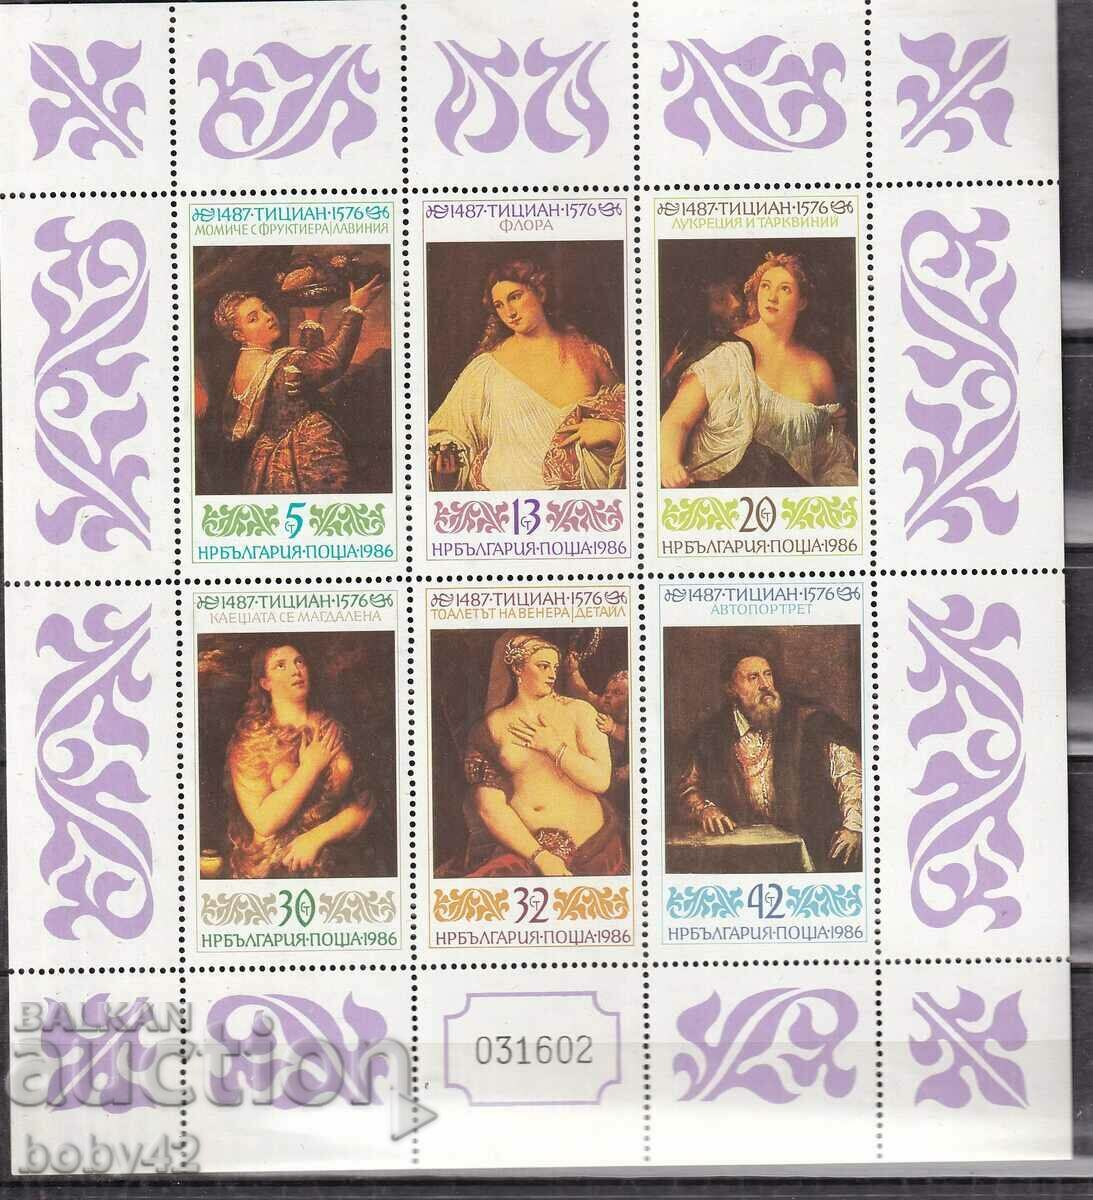 BK 3557-3562 block sheet 500 years from the birth of Titian